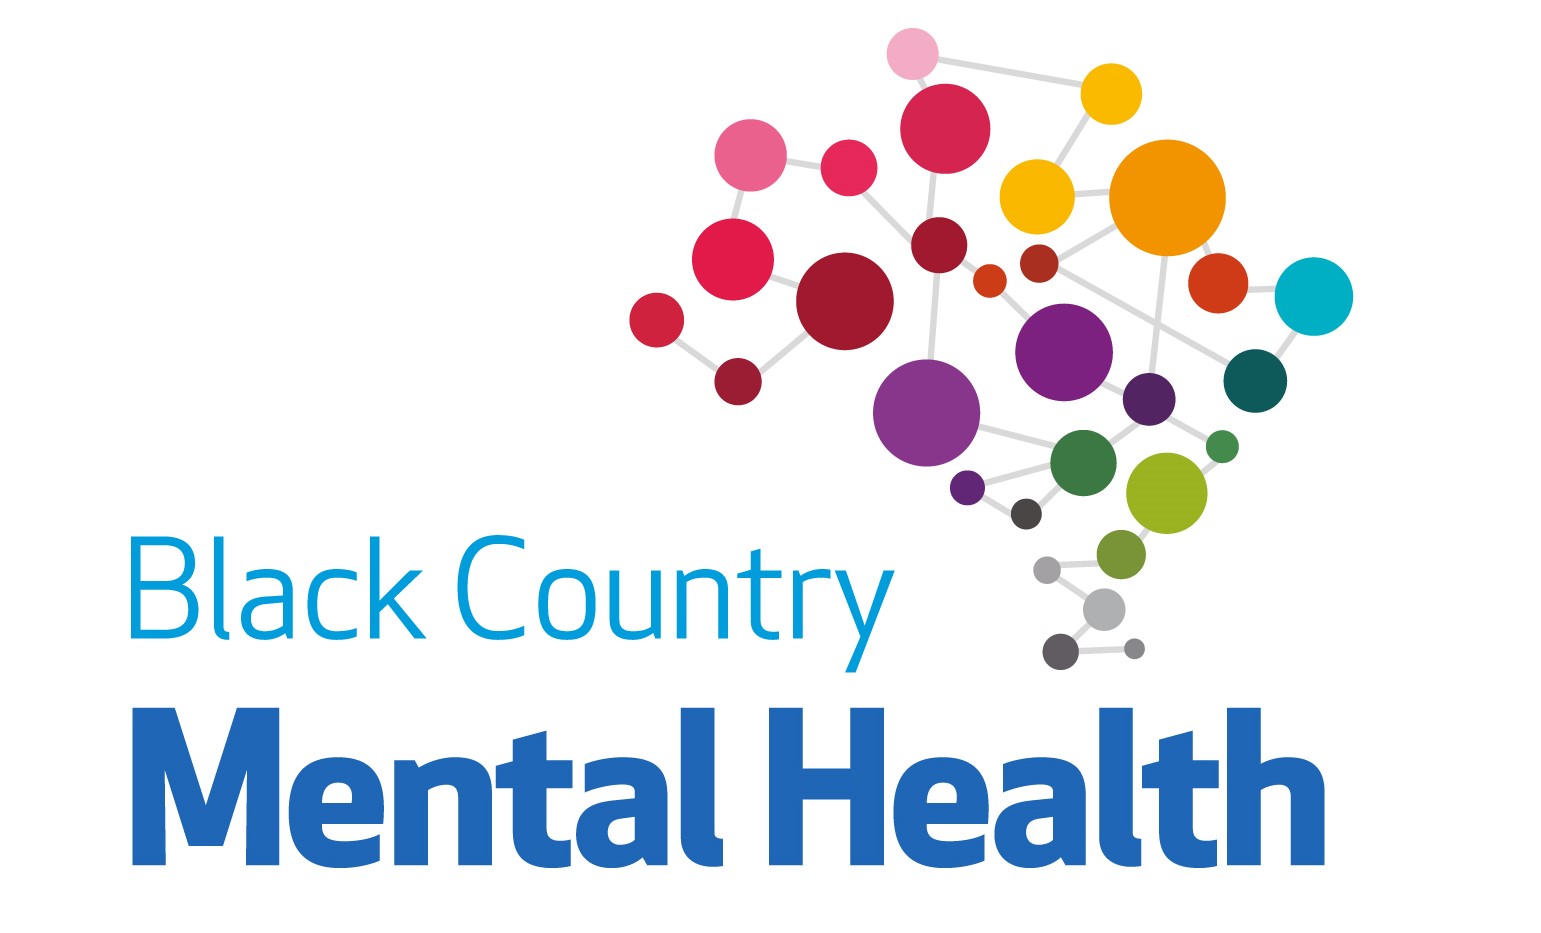 Black Country Mental Health - Building Bridges Anxiety and Depression Support Group